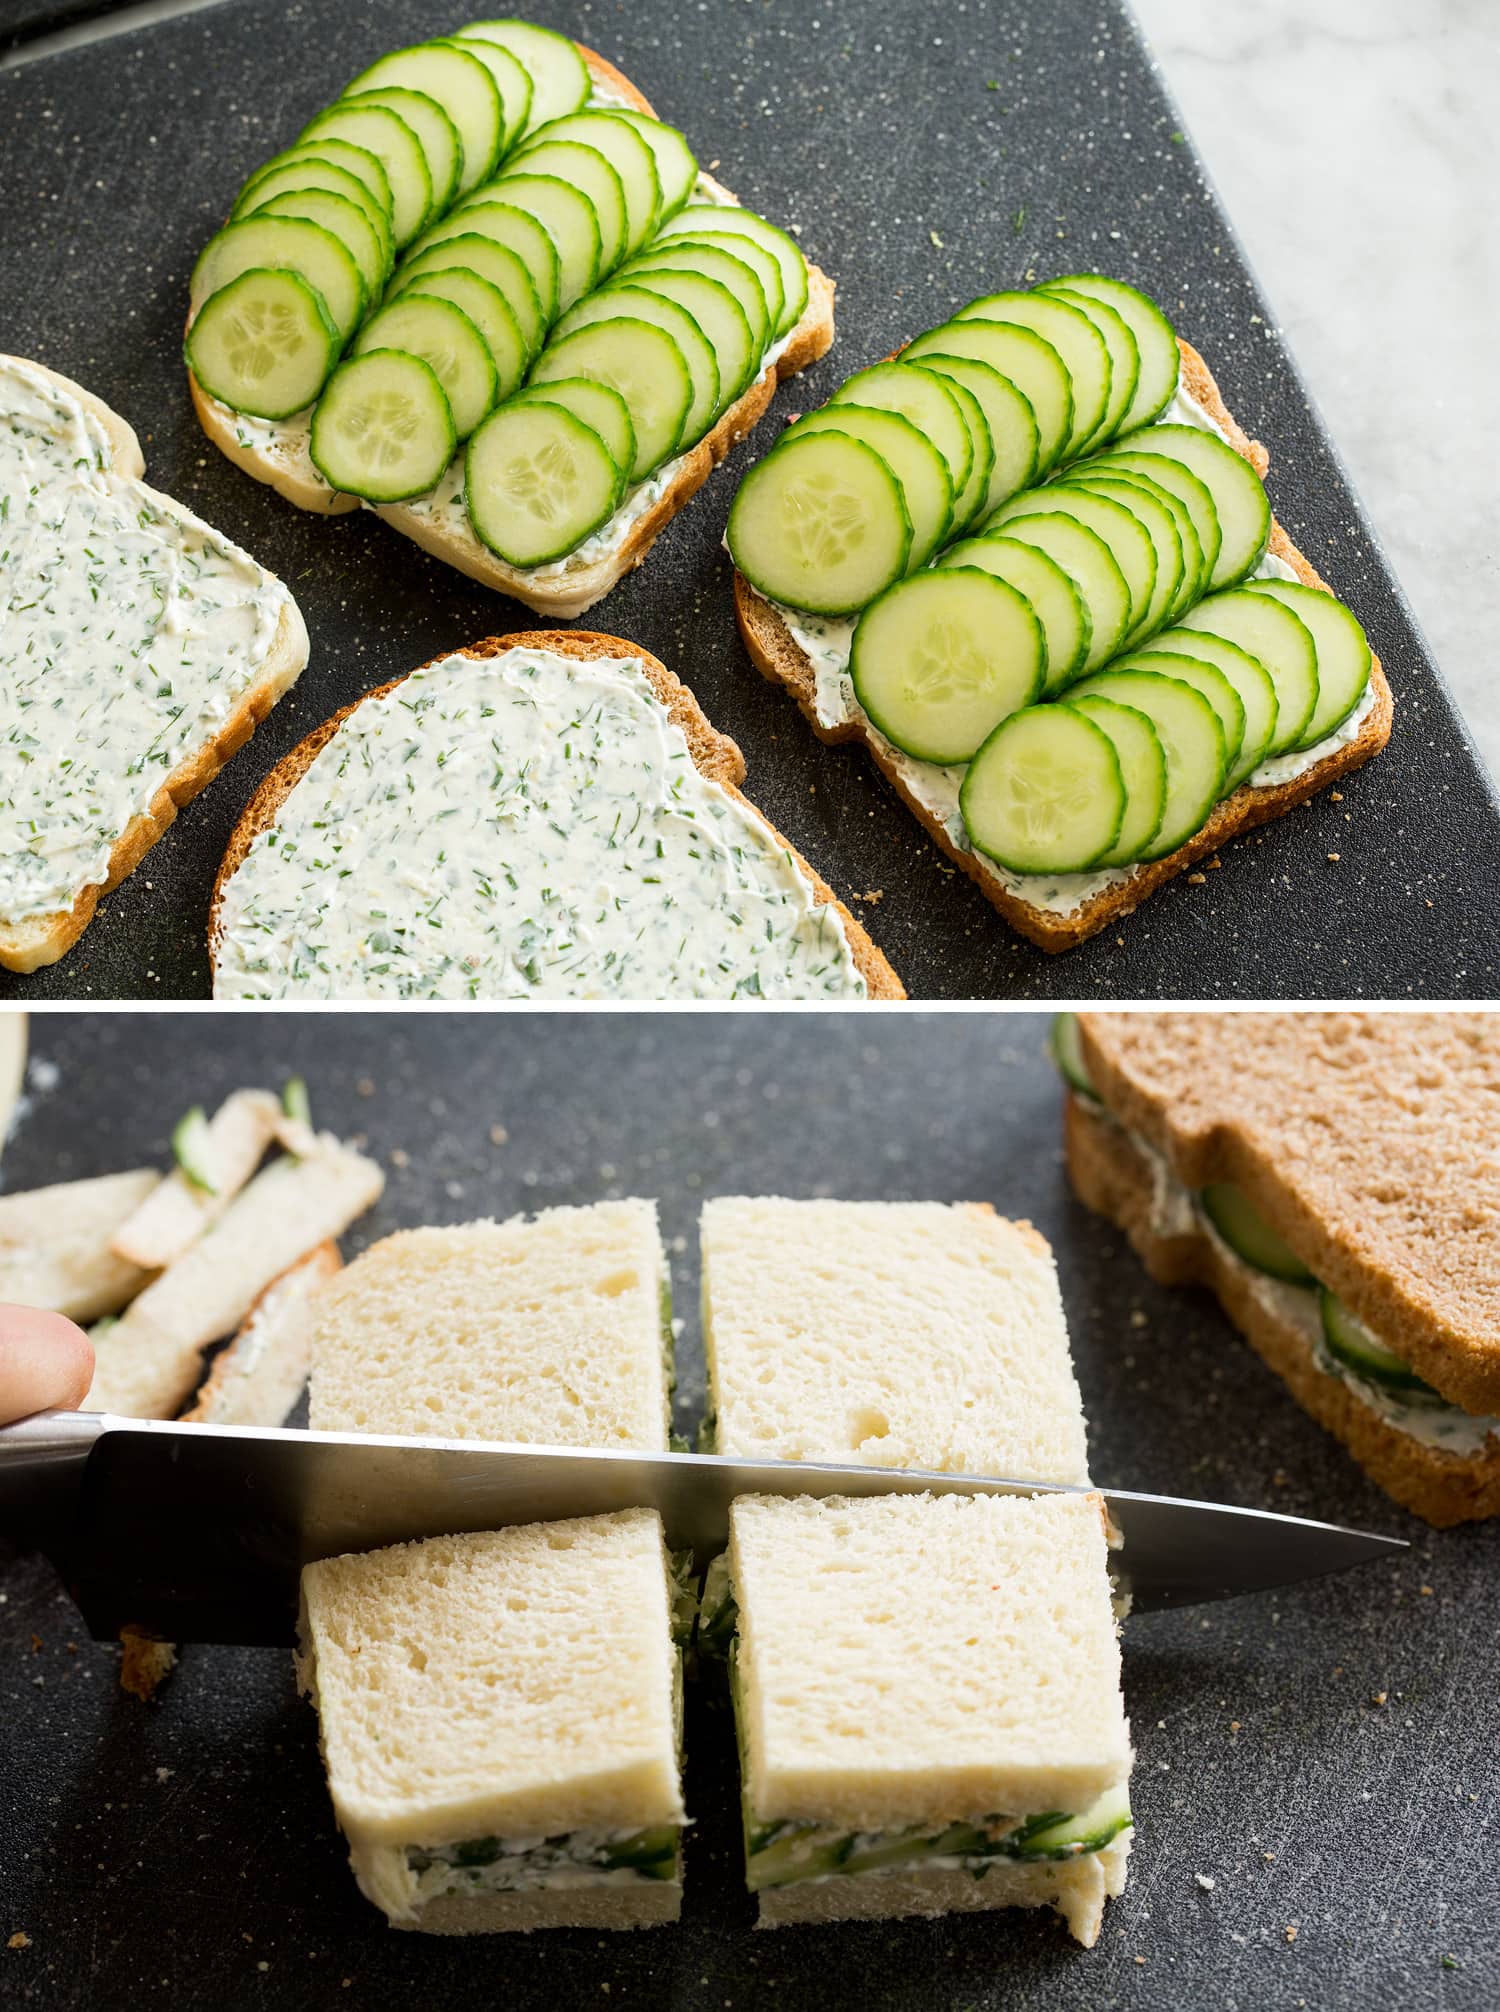 Toppings sandwiches with cucumbers and slicing.